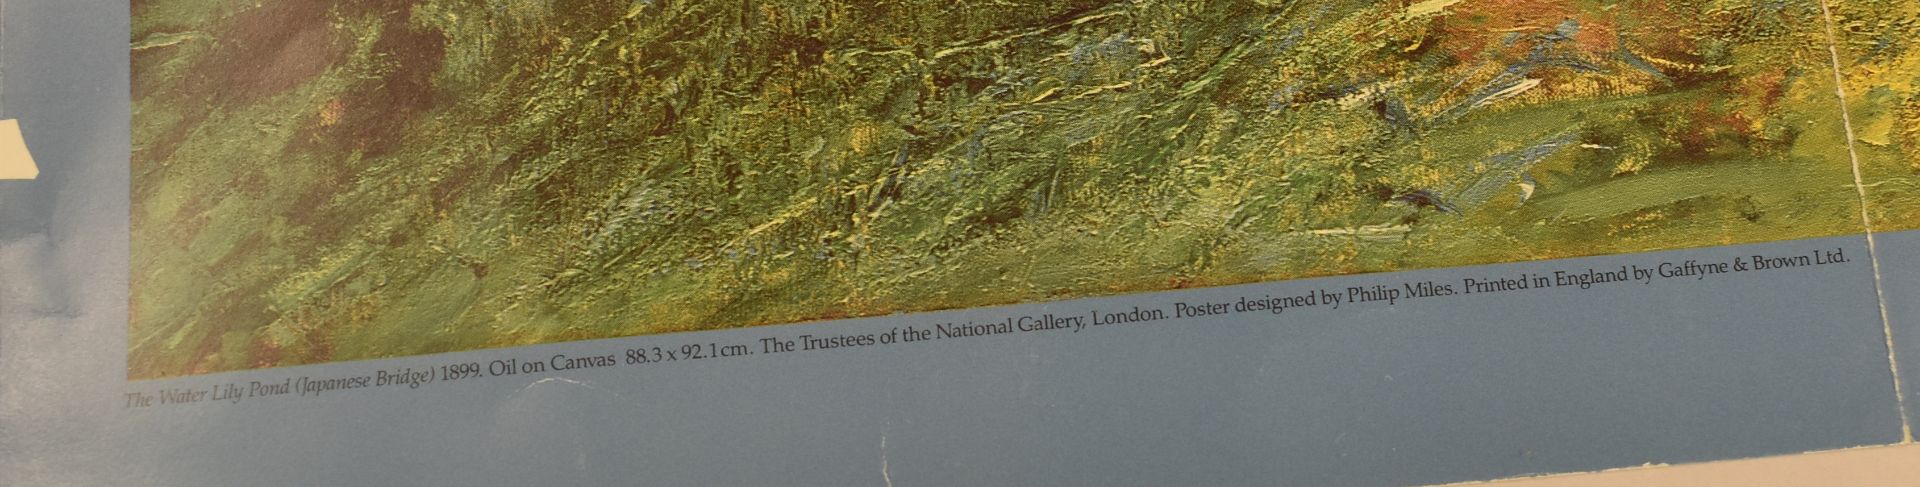 CLAUDE MONET - 1990 ROYAL ACADEMY OF ARTS EXHIBITION POSTER - Image 4 of 5